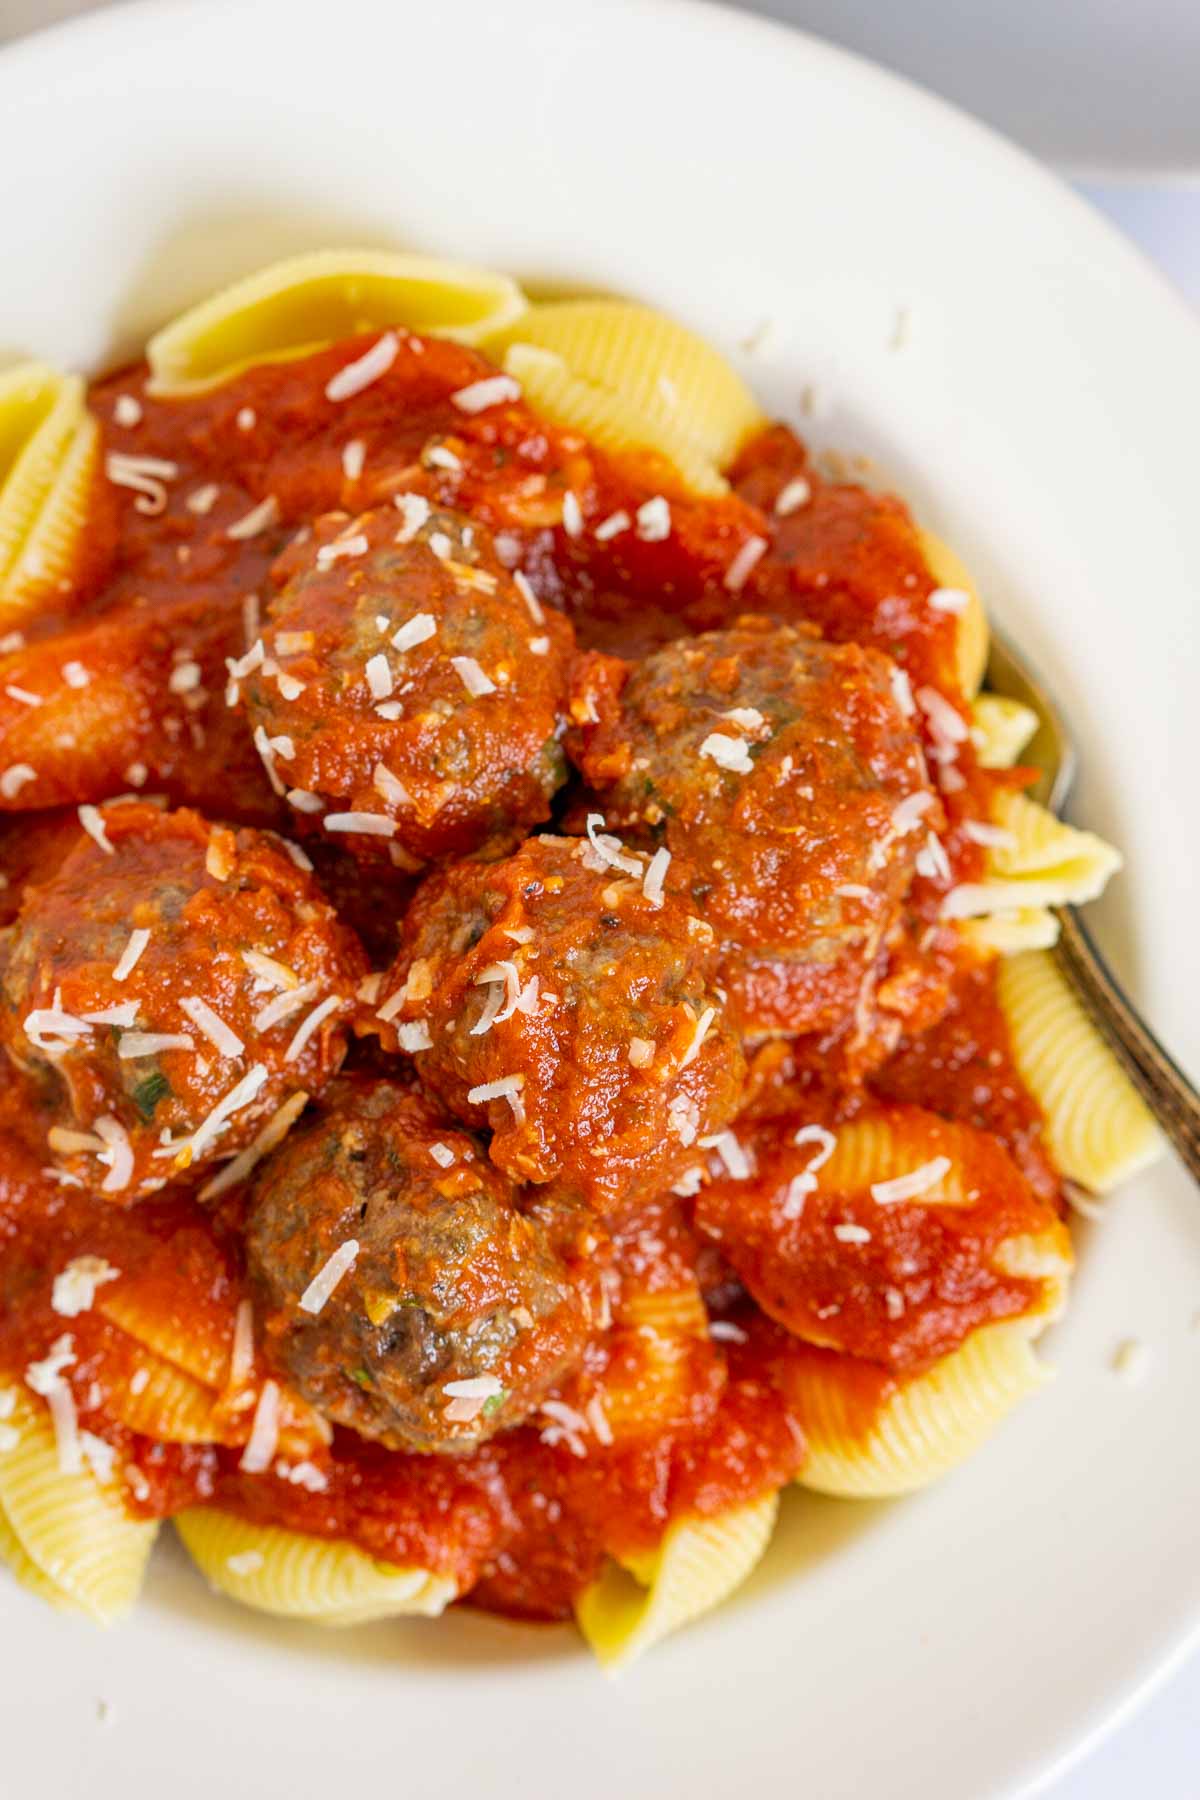 Plate of bison meatballs with marinara sauce over pasta